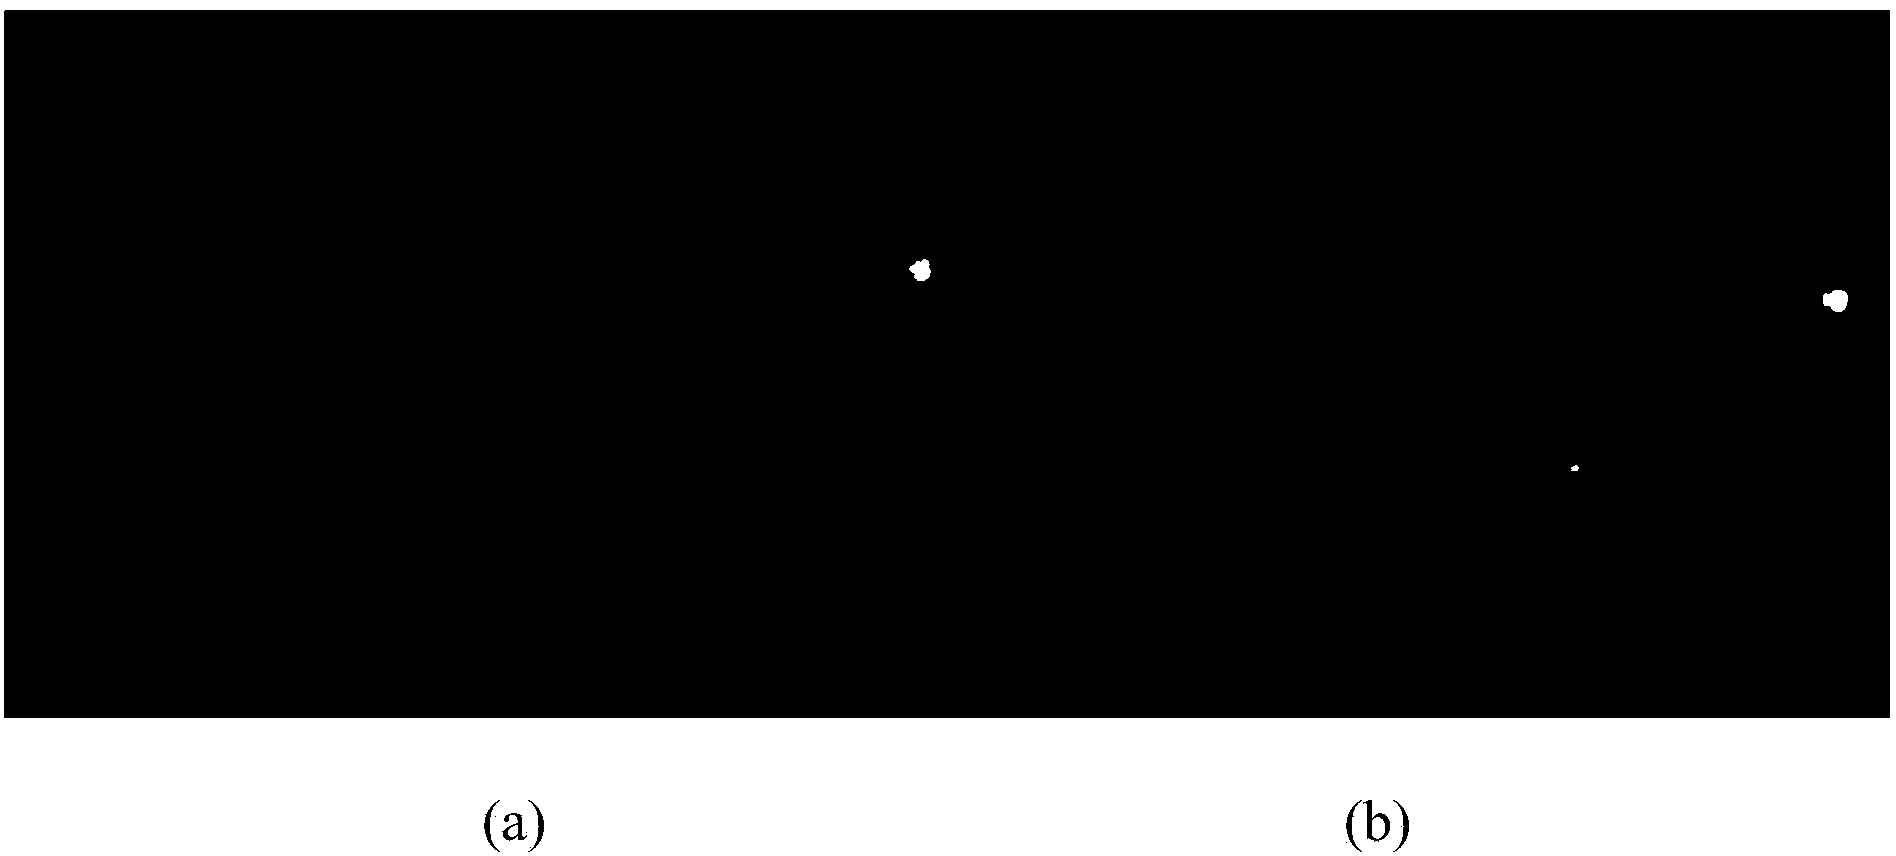 Video image stabilization method based on color constant and geometry invariant features